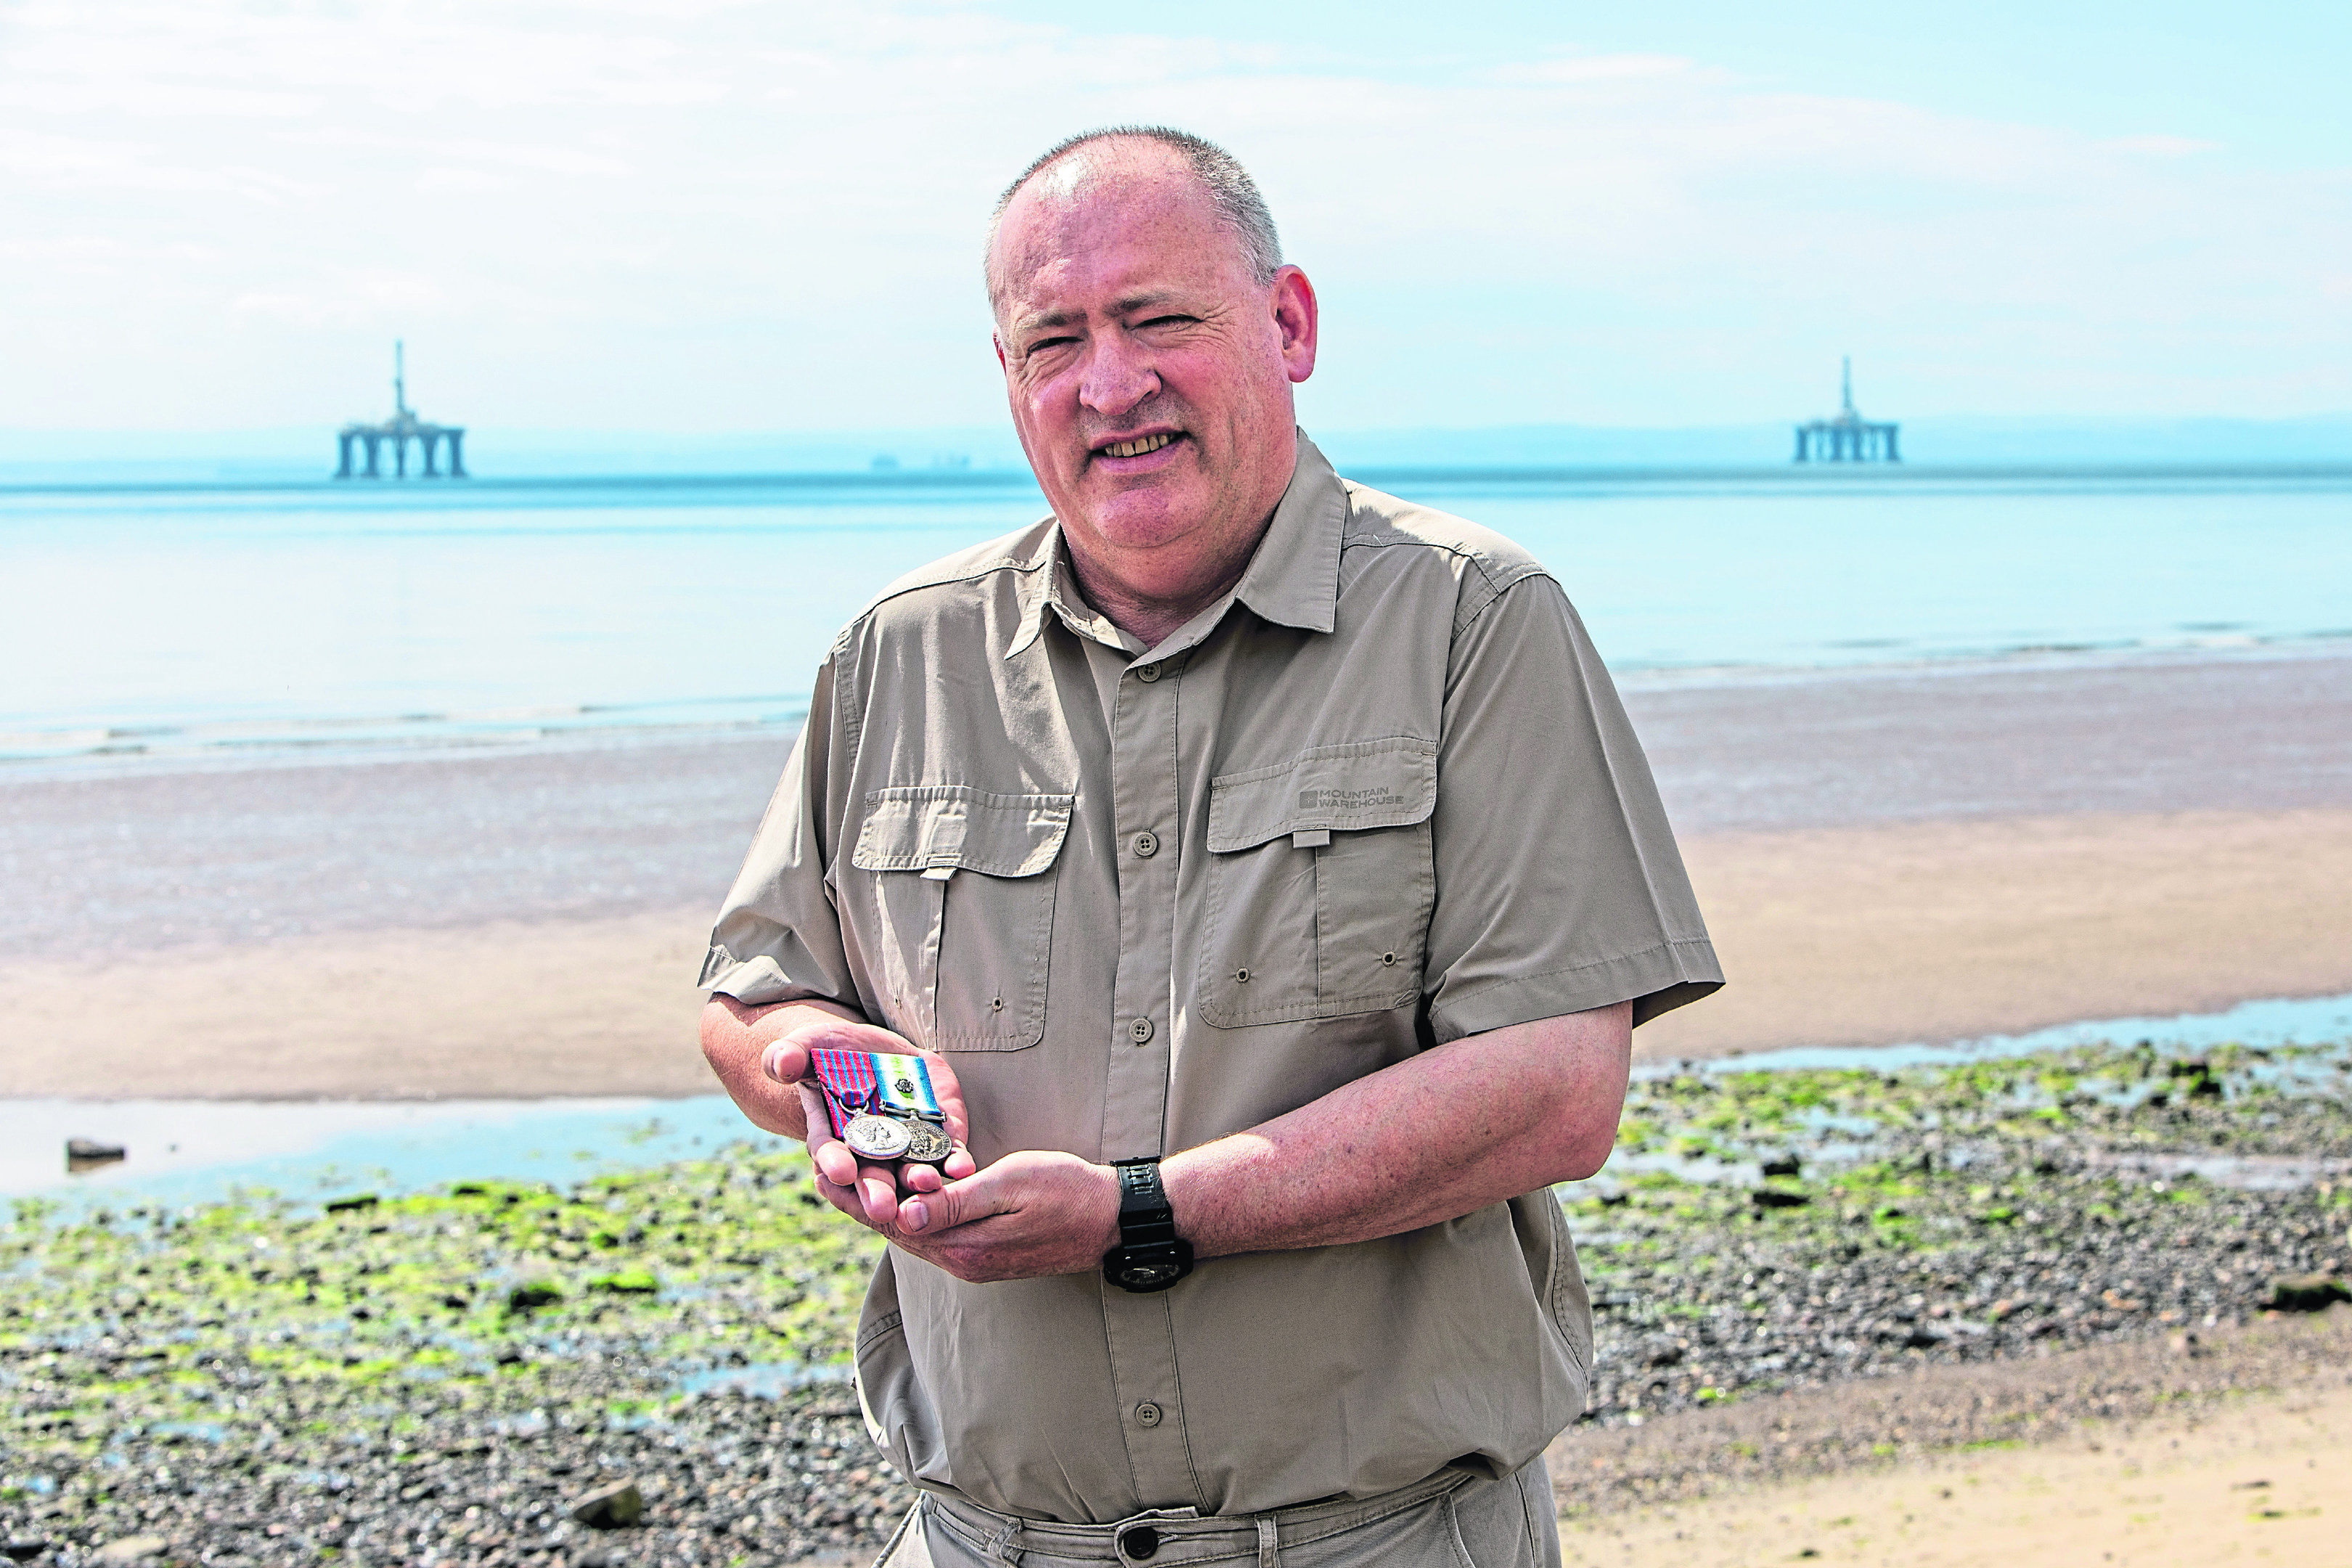 Charles Haffey with his George Medal awarded for the rescues in the Piper Alpha disaster.